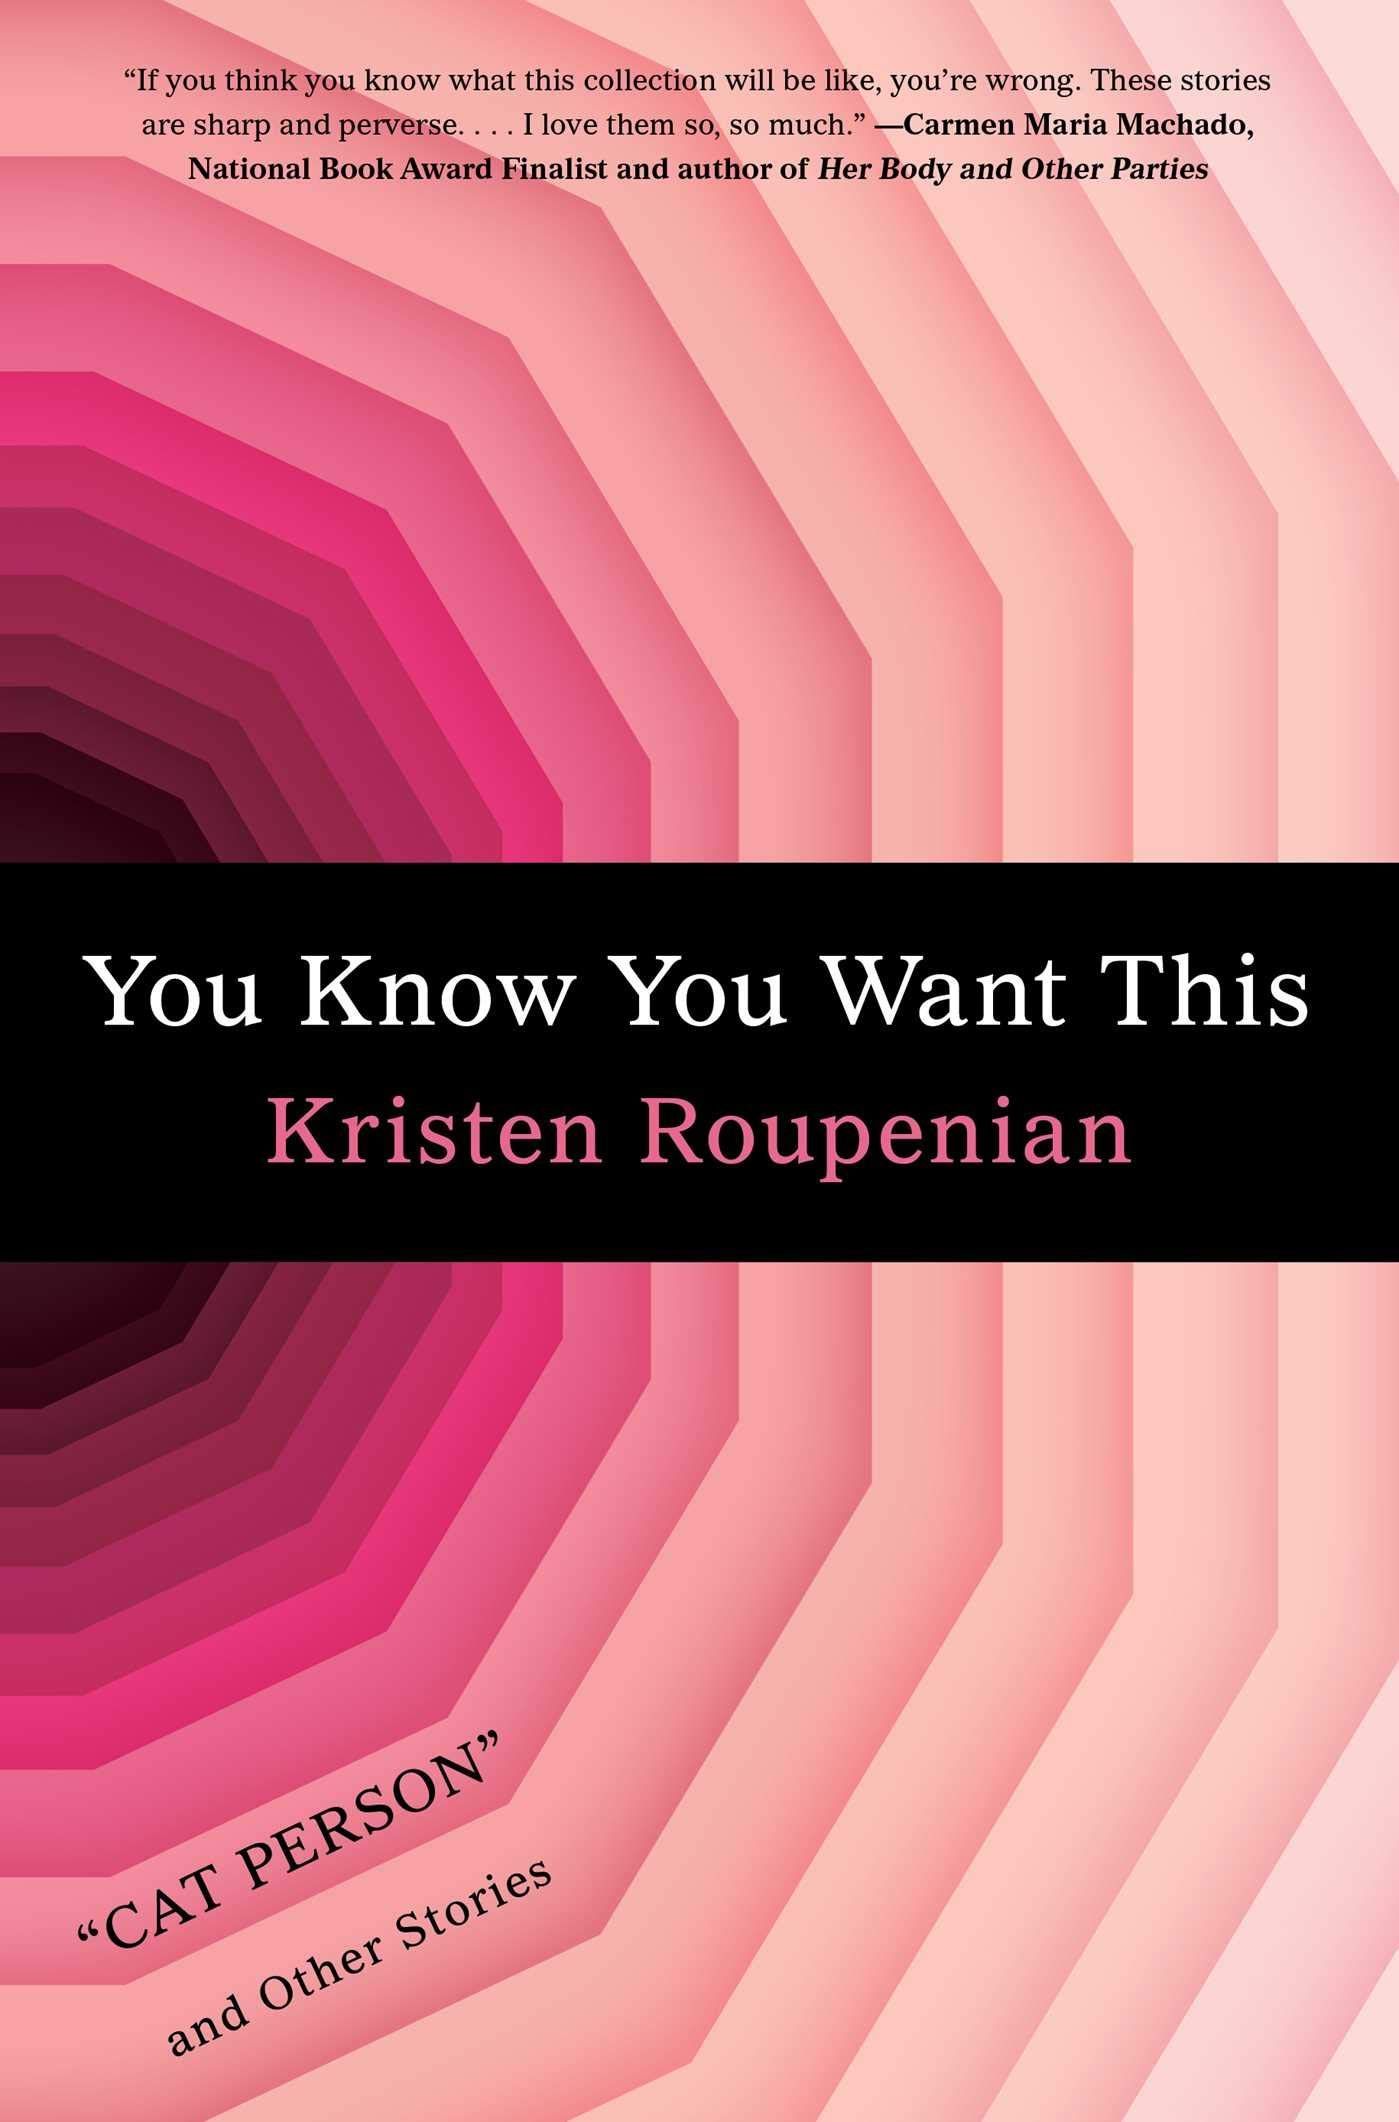 But Are You Sure?: On Kristen Roupenian’s “You Know You Want This: ‘Cat Person’ and Other Stories”